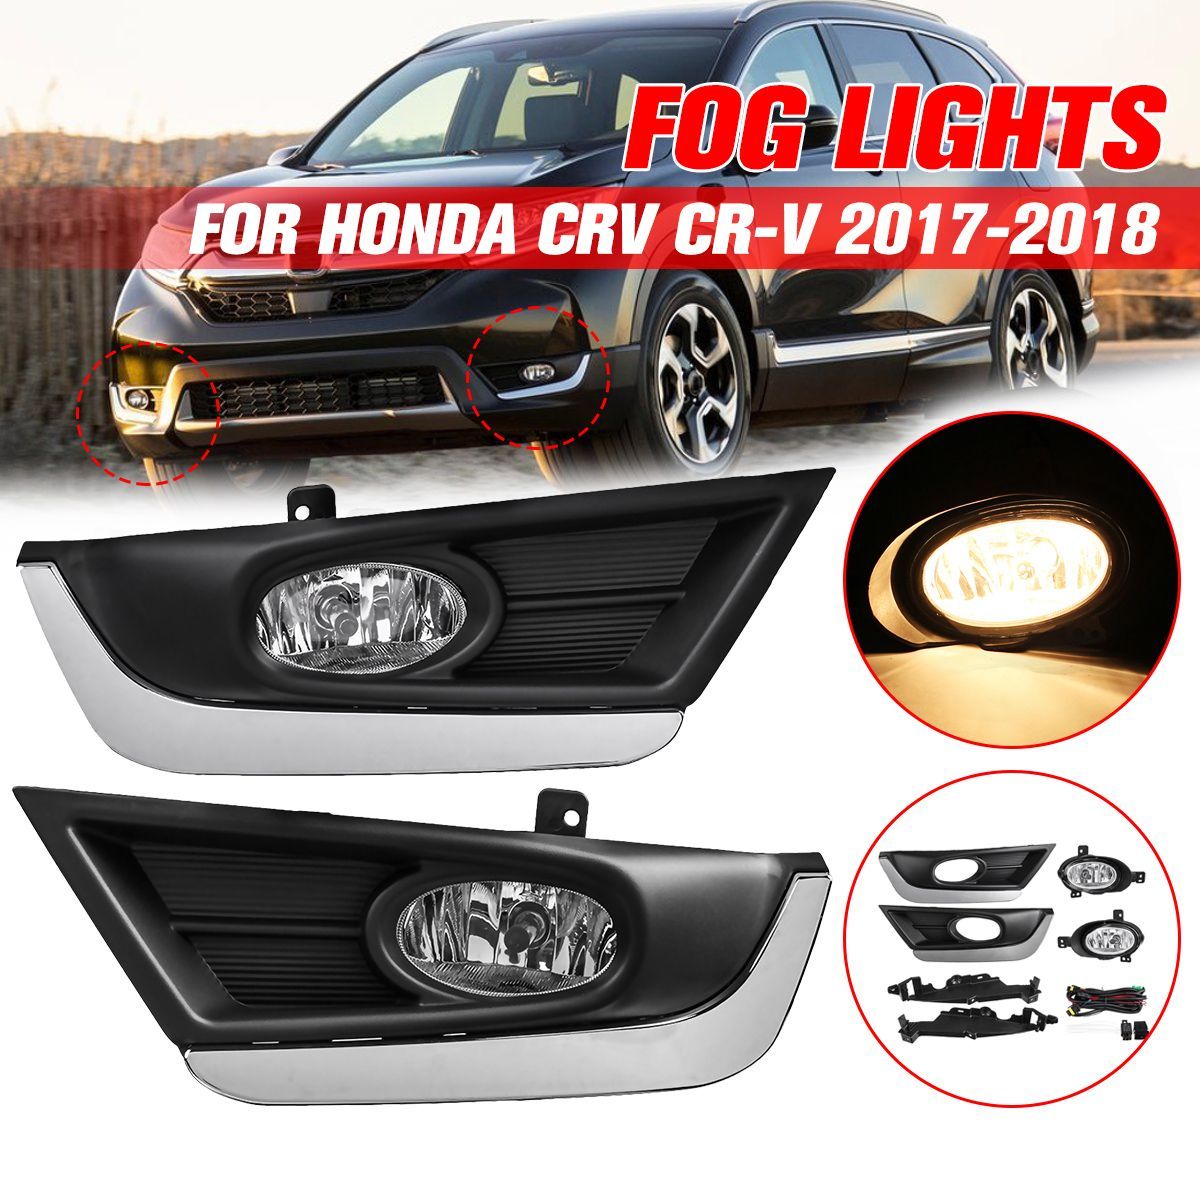 Car-Front-Bumper-Fog-Lights-Driving-Lamps-with-Wiring-Harness-Silver-Pair-for-Honda-CRV-CR-V-2017-20-1476806